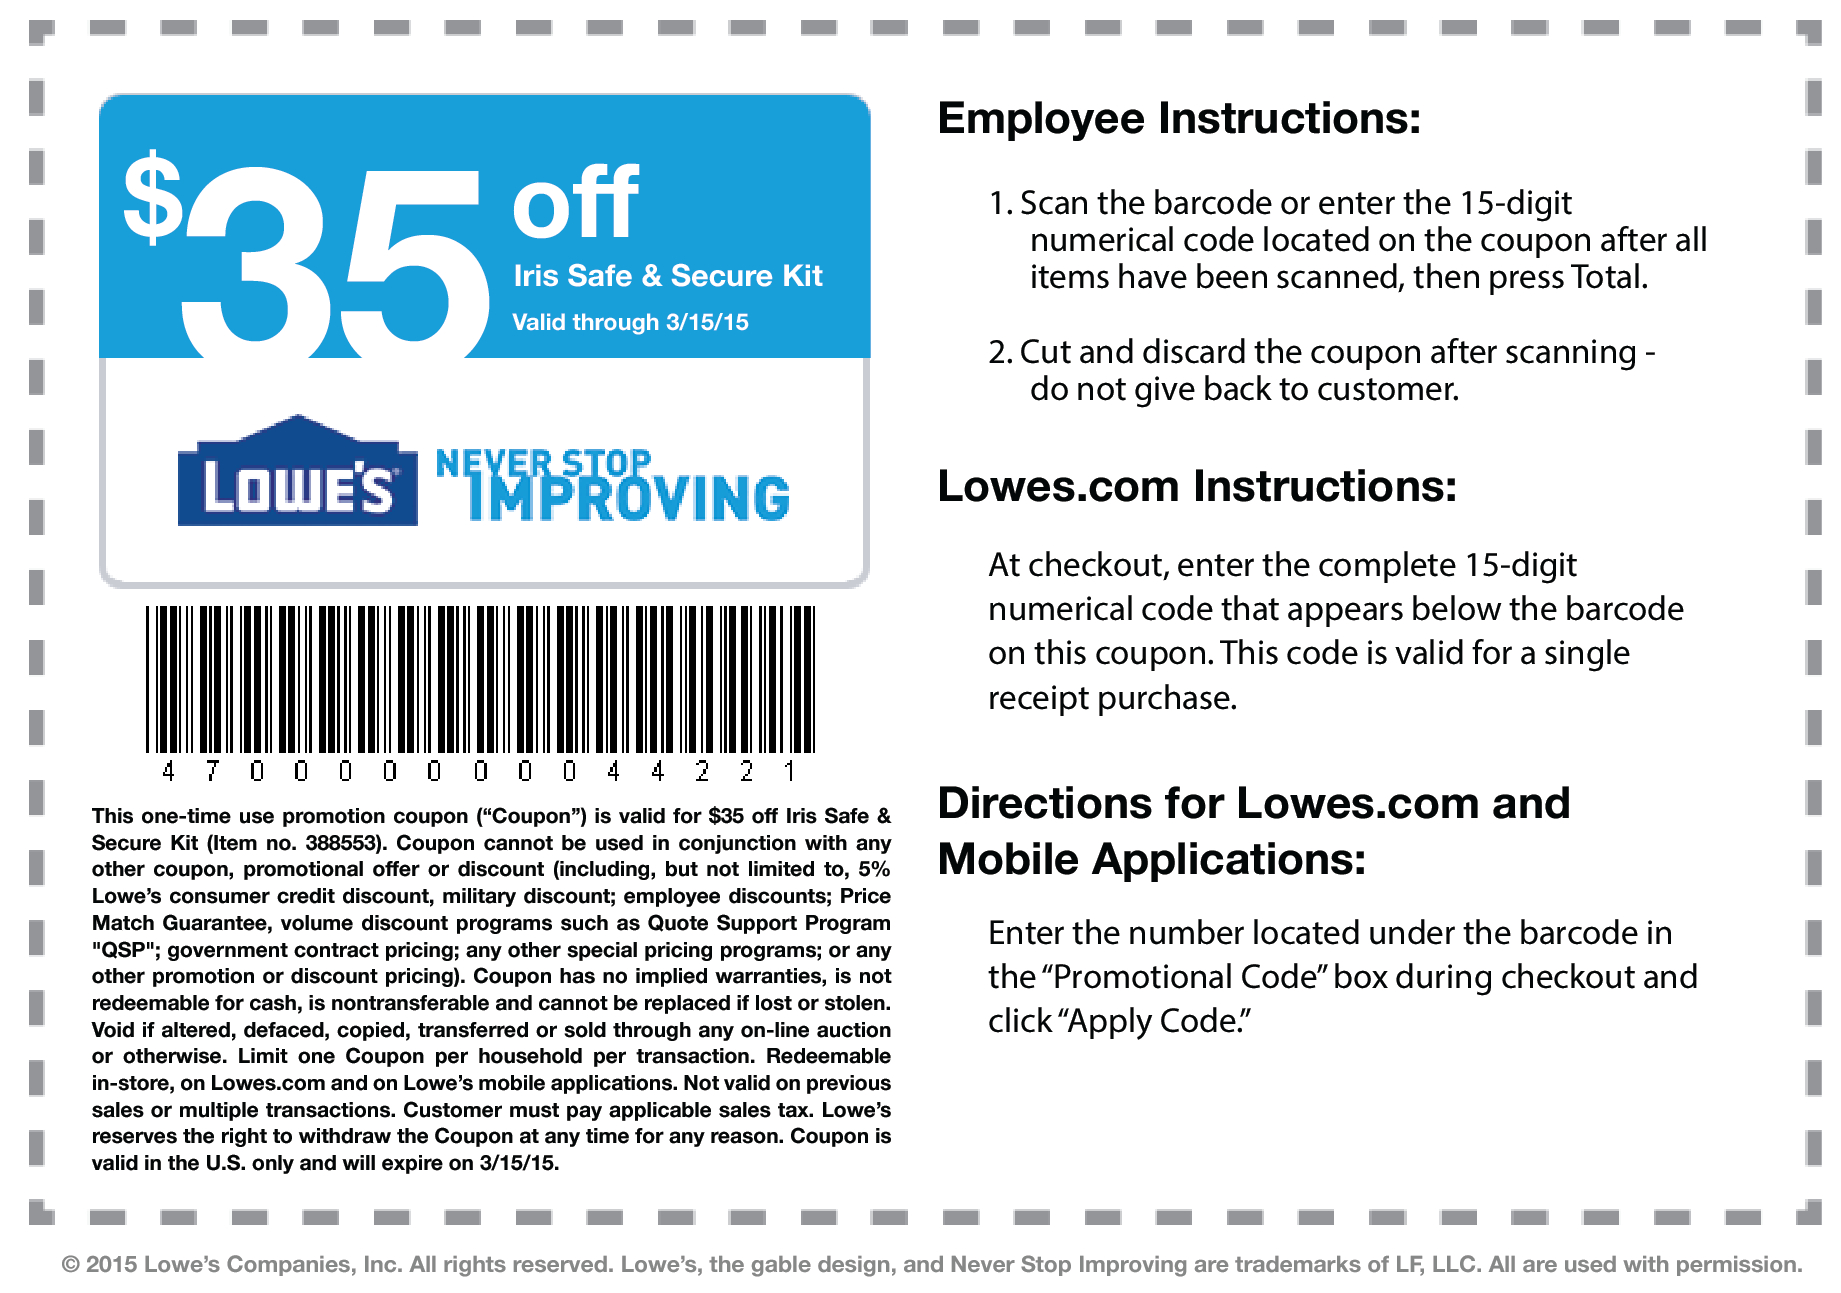 Lowes Coupons Download & Print Free Printable Lowes Coupons Free